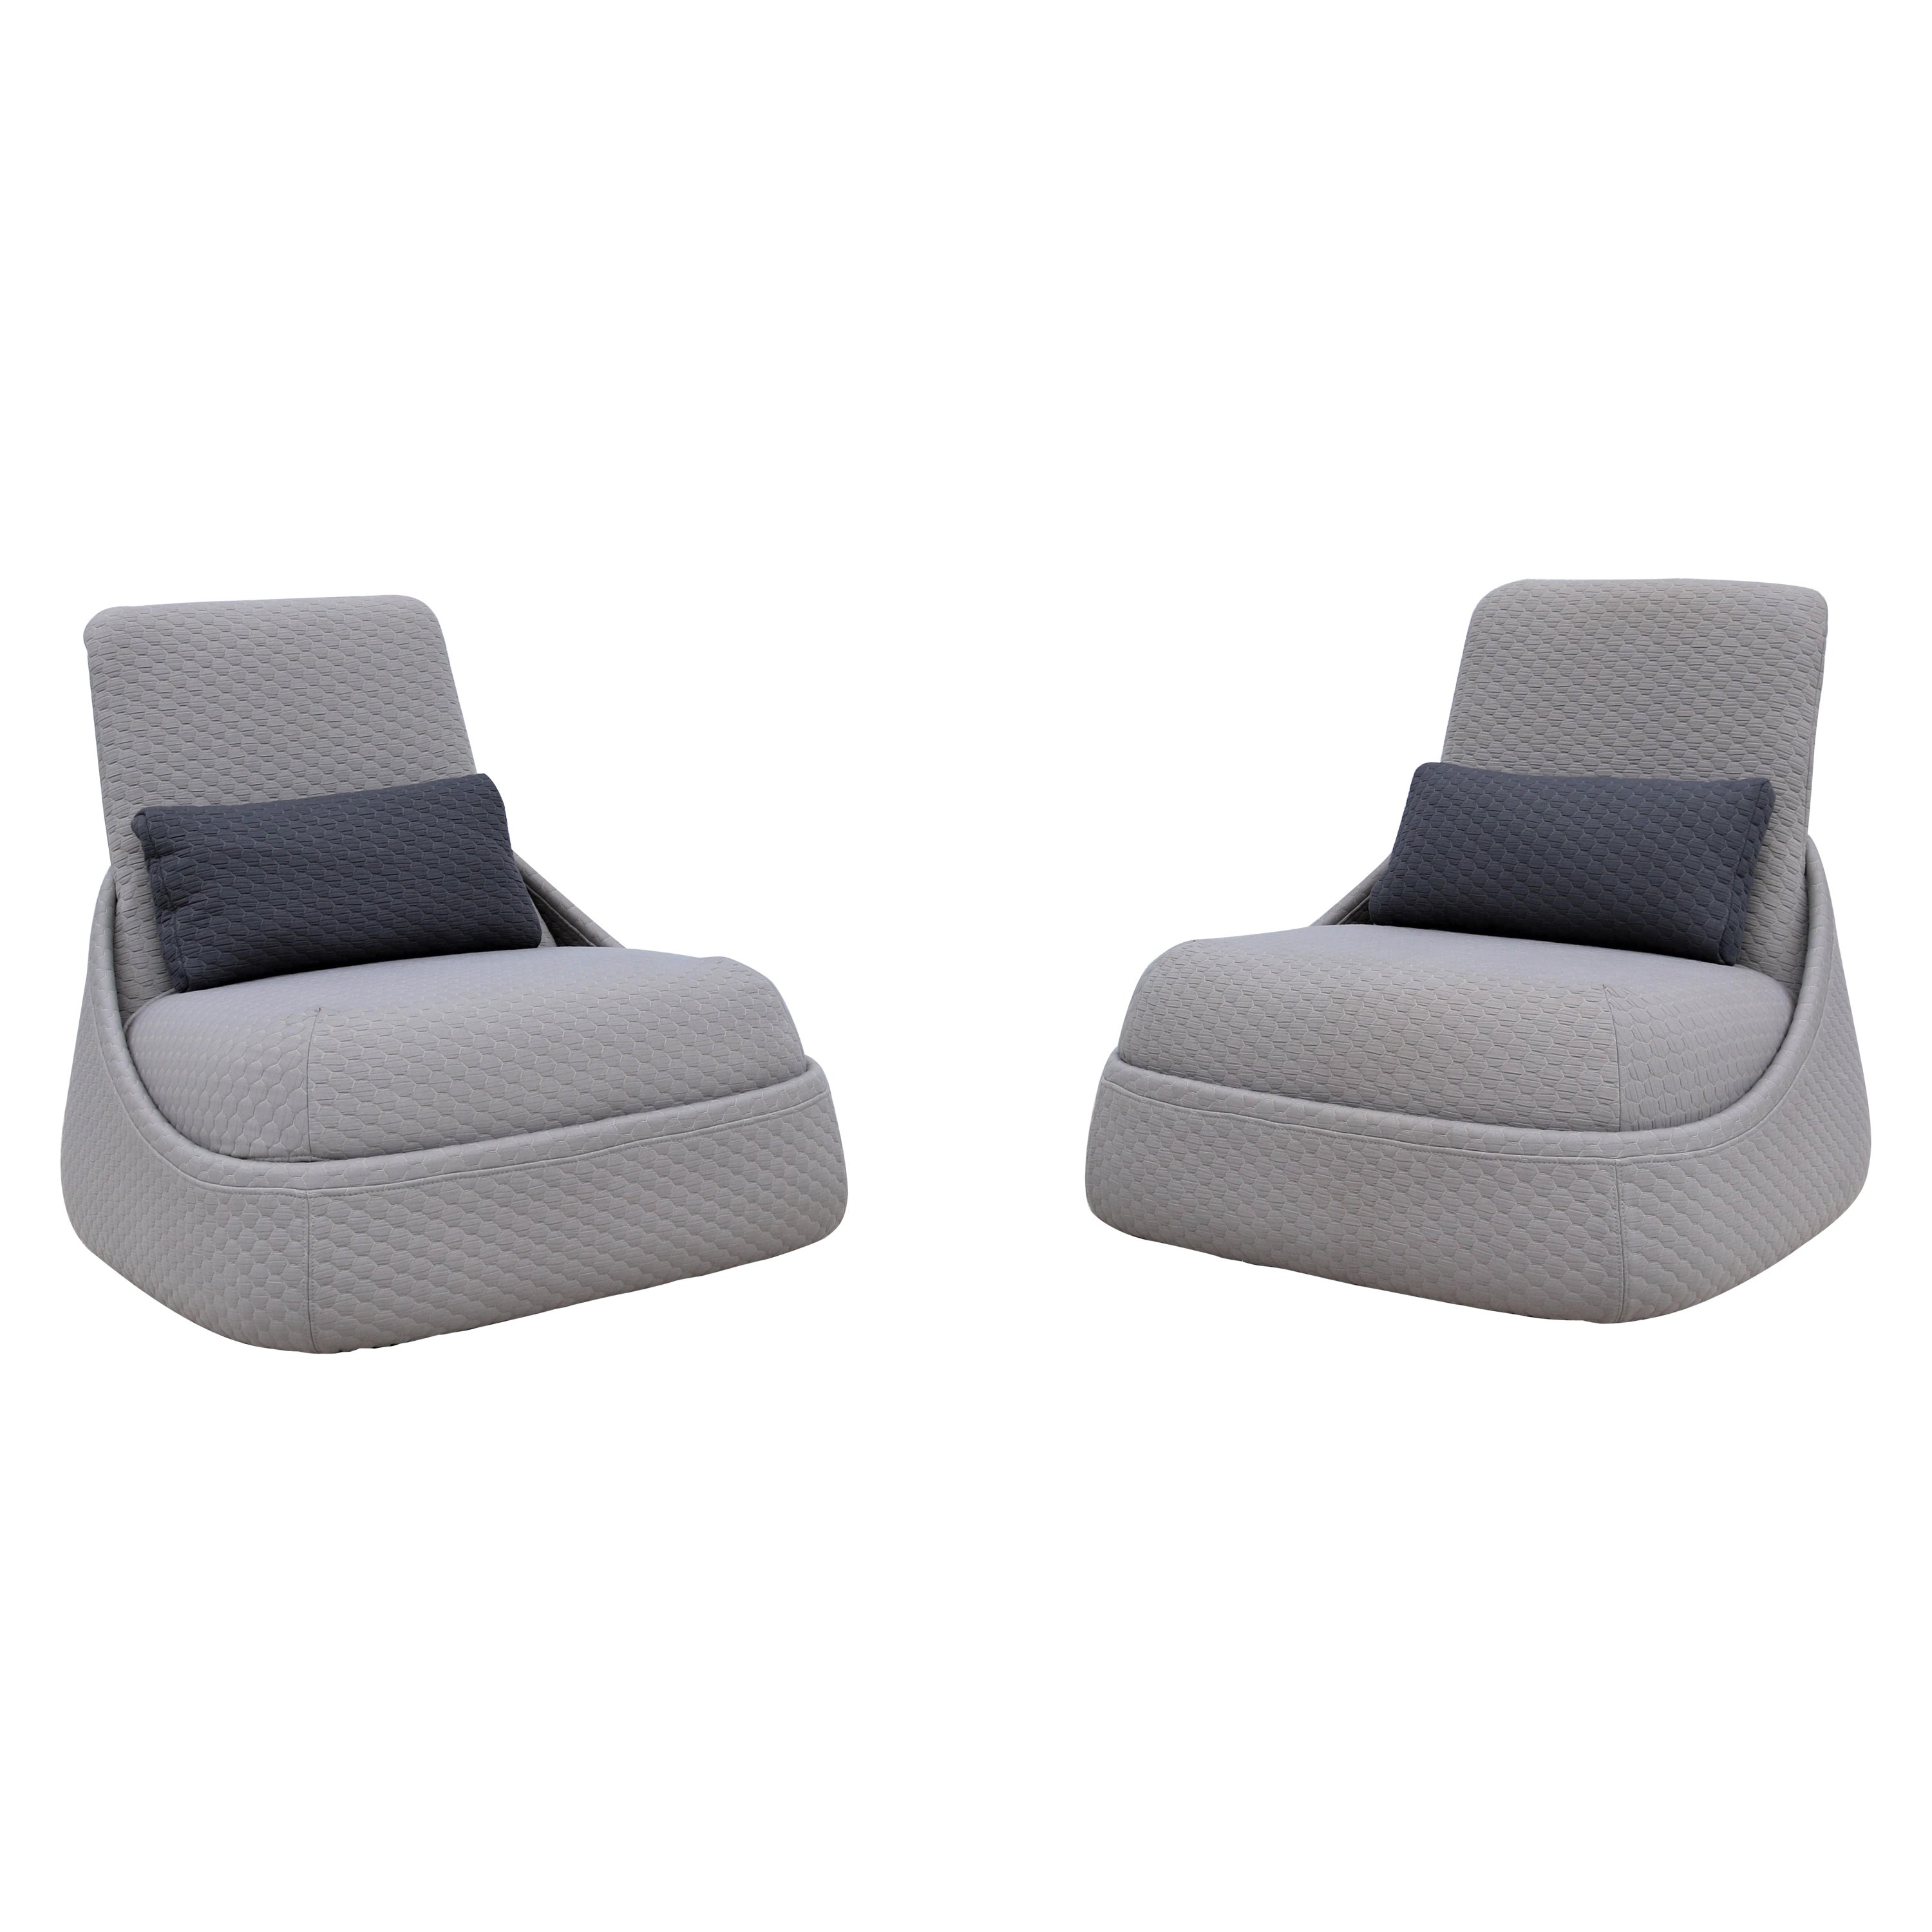 Modern Patricia Urquiola for Coalesse Hosu Lounge Chairs with Ottoman, a Pair For Sale